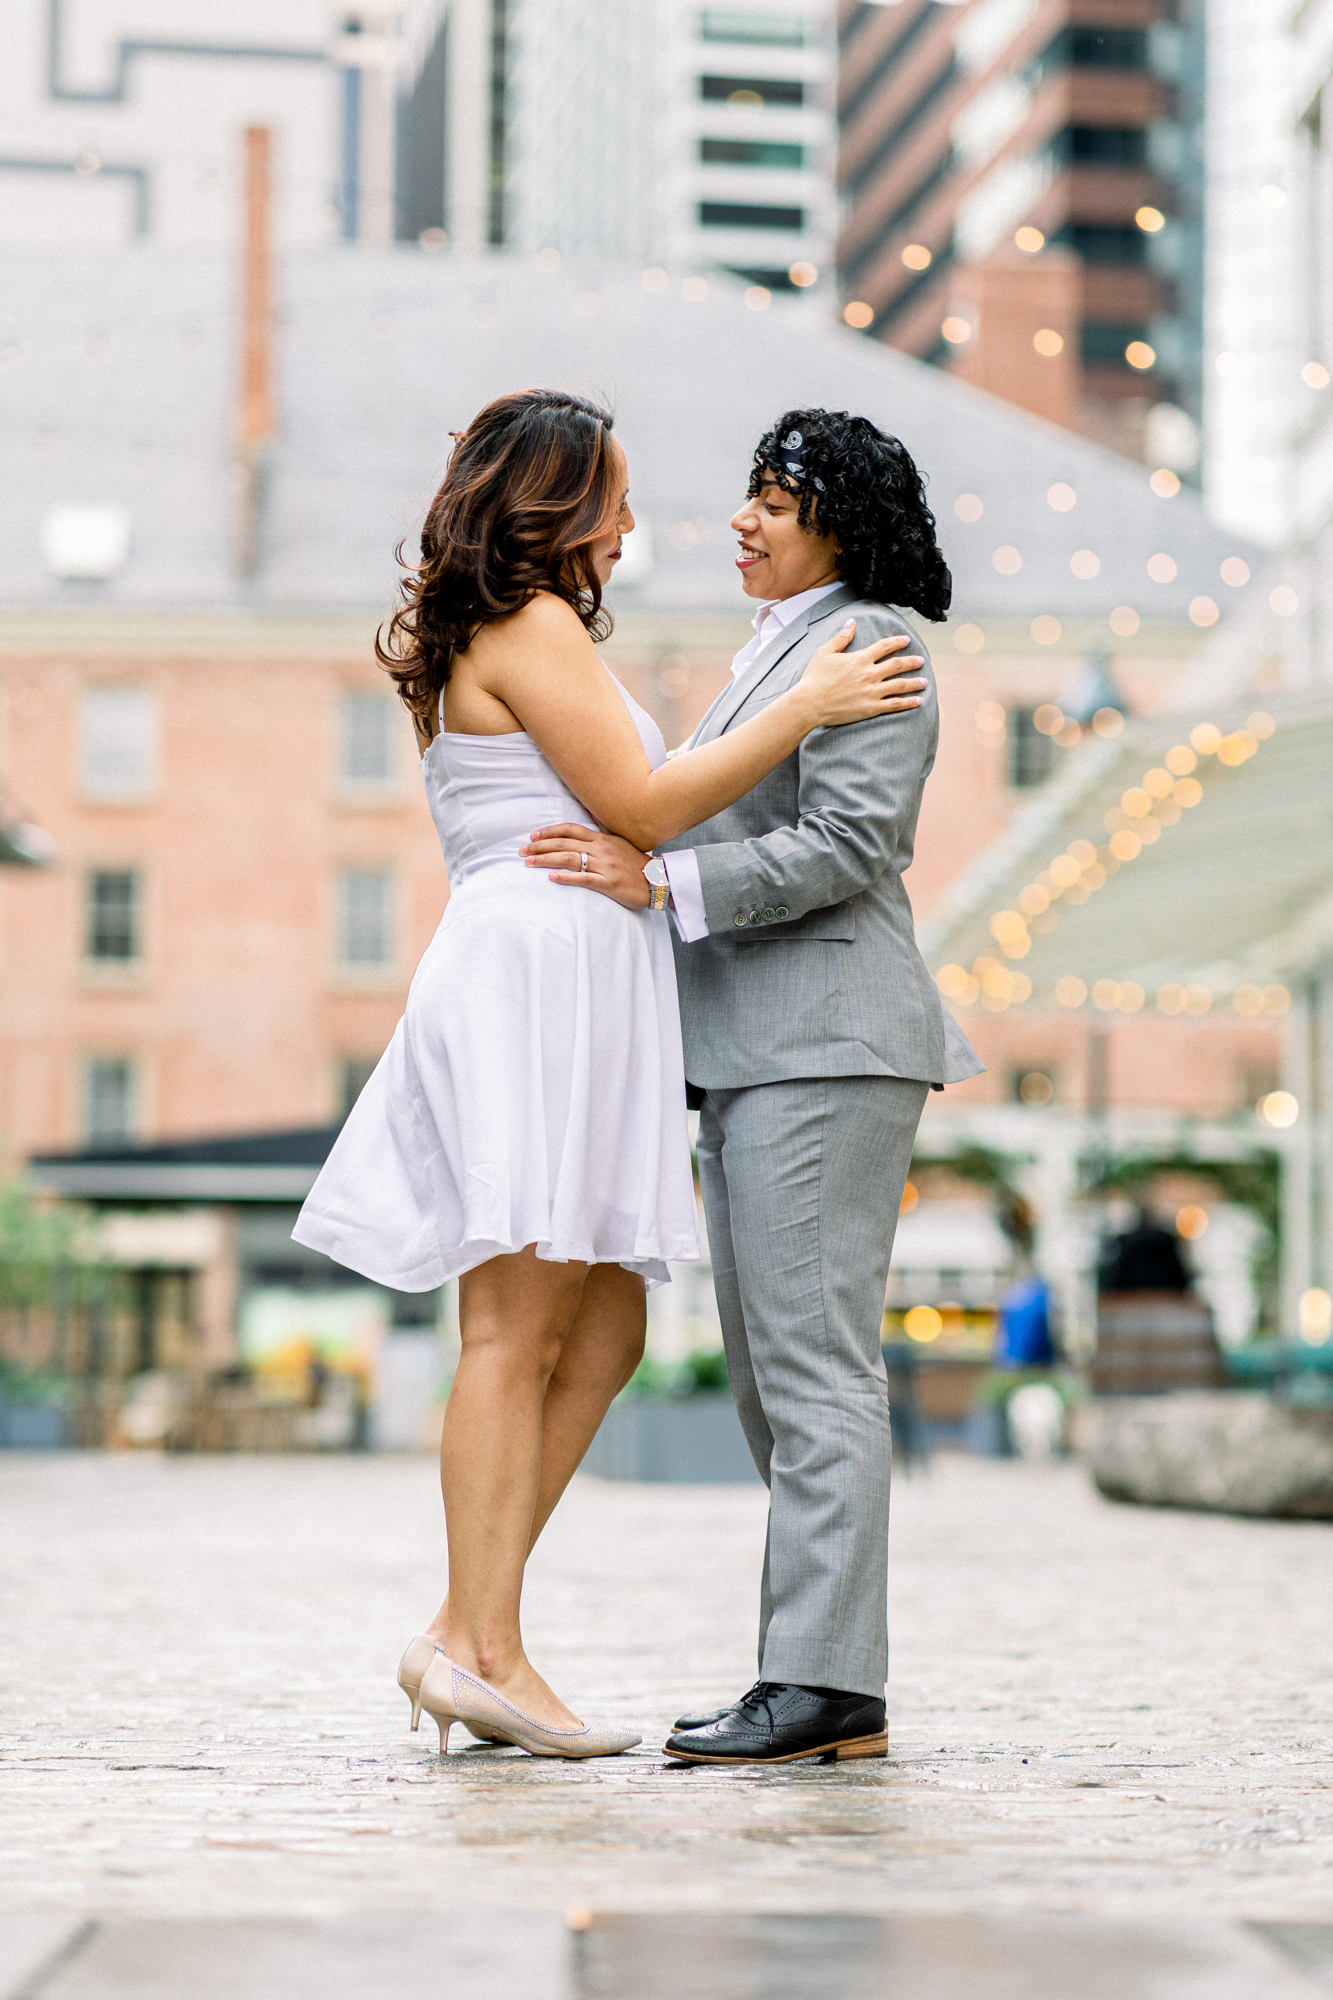 Incredible South Street Seaport Engagement Photography